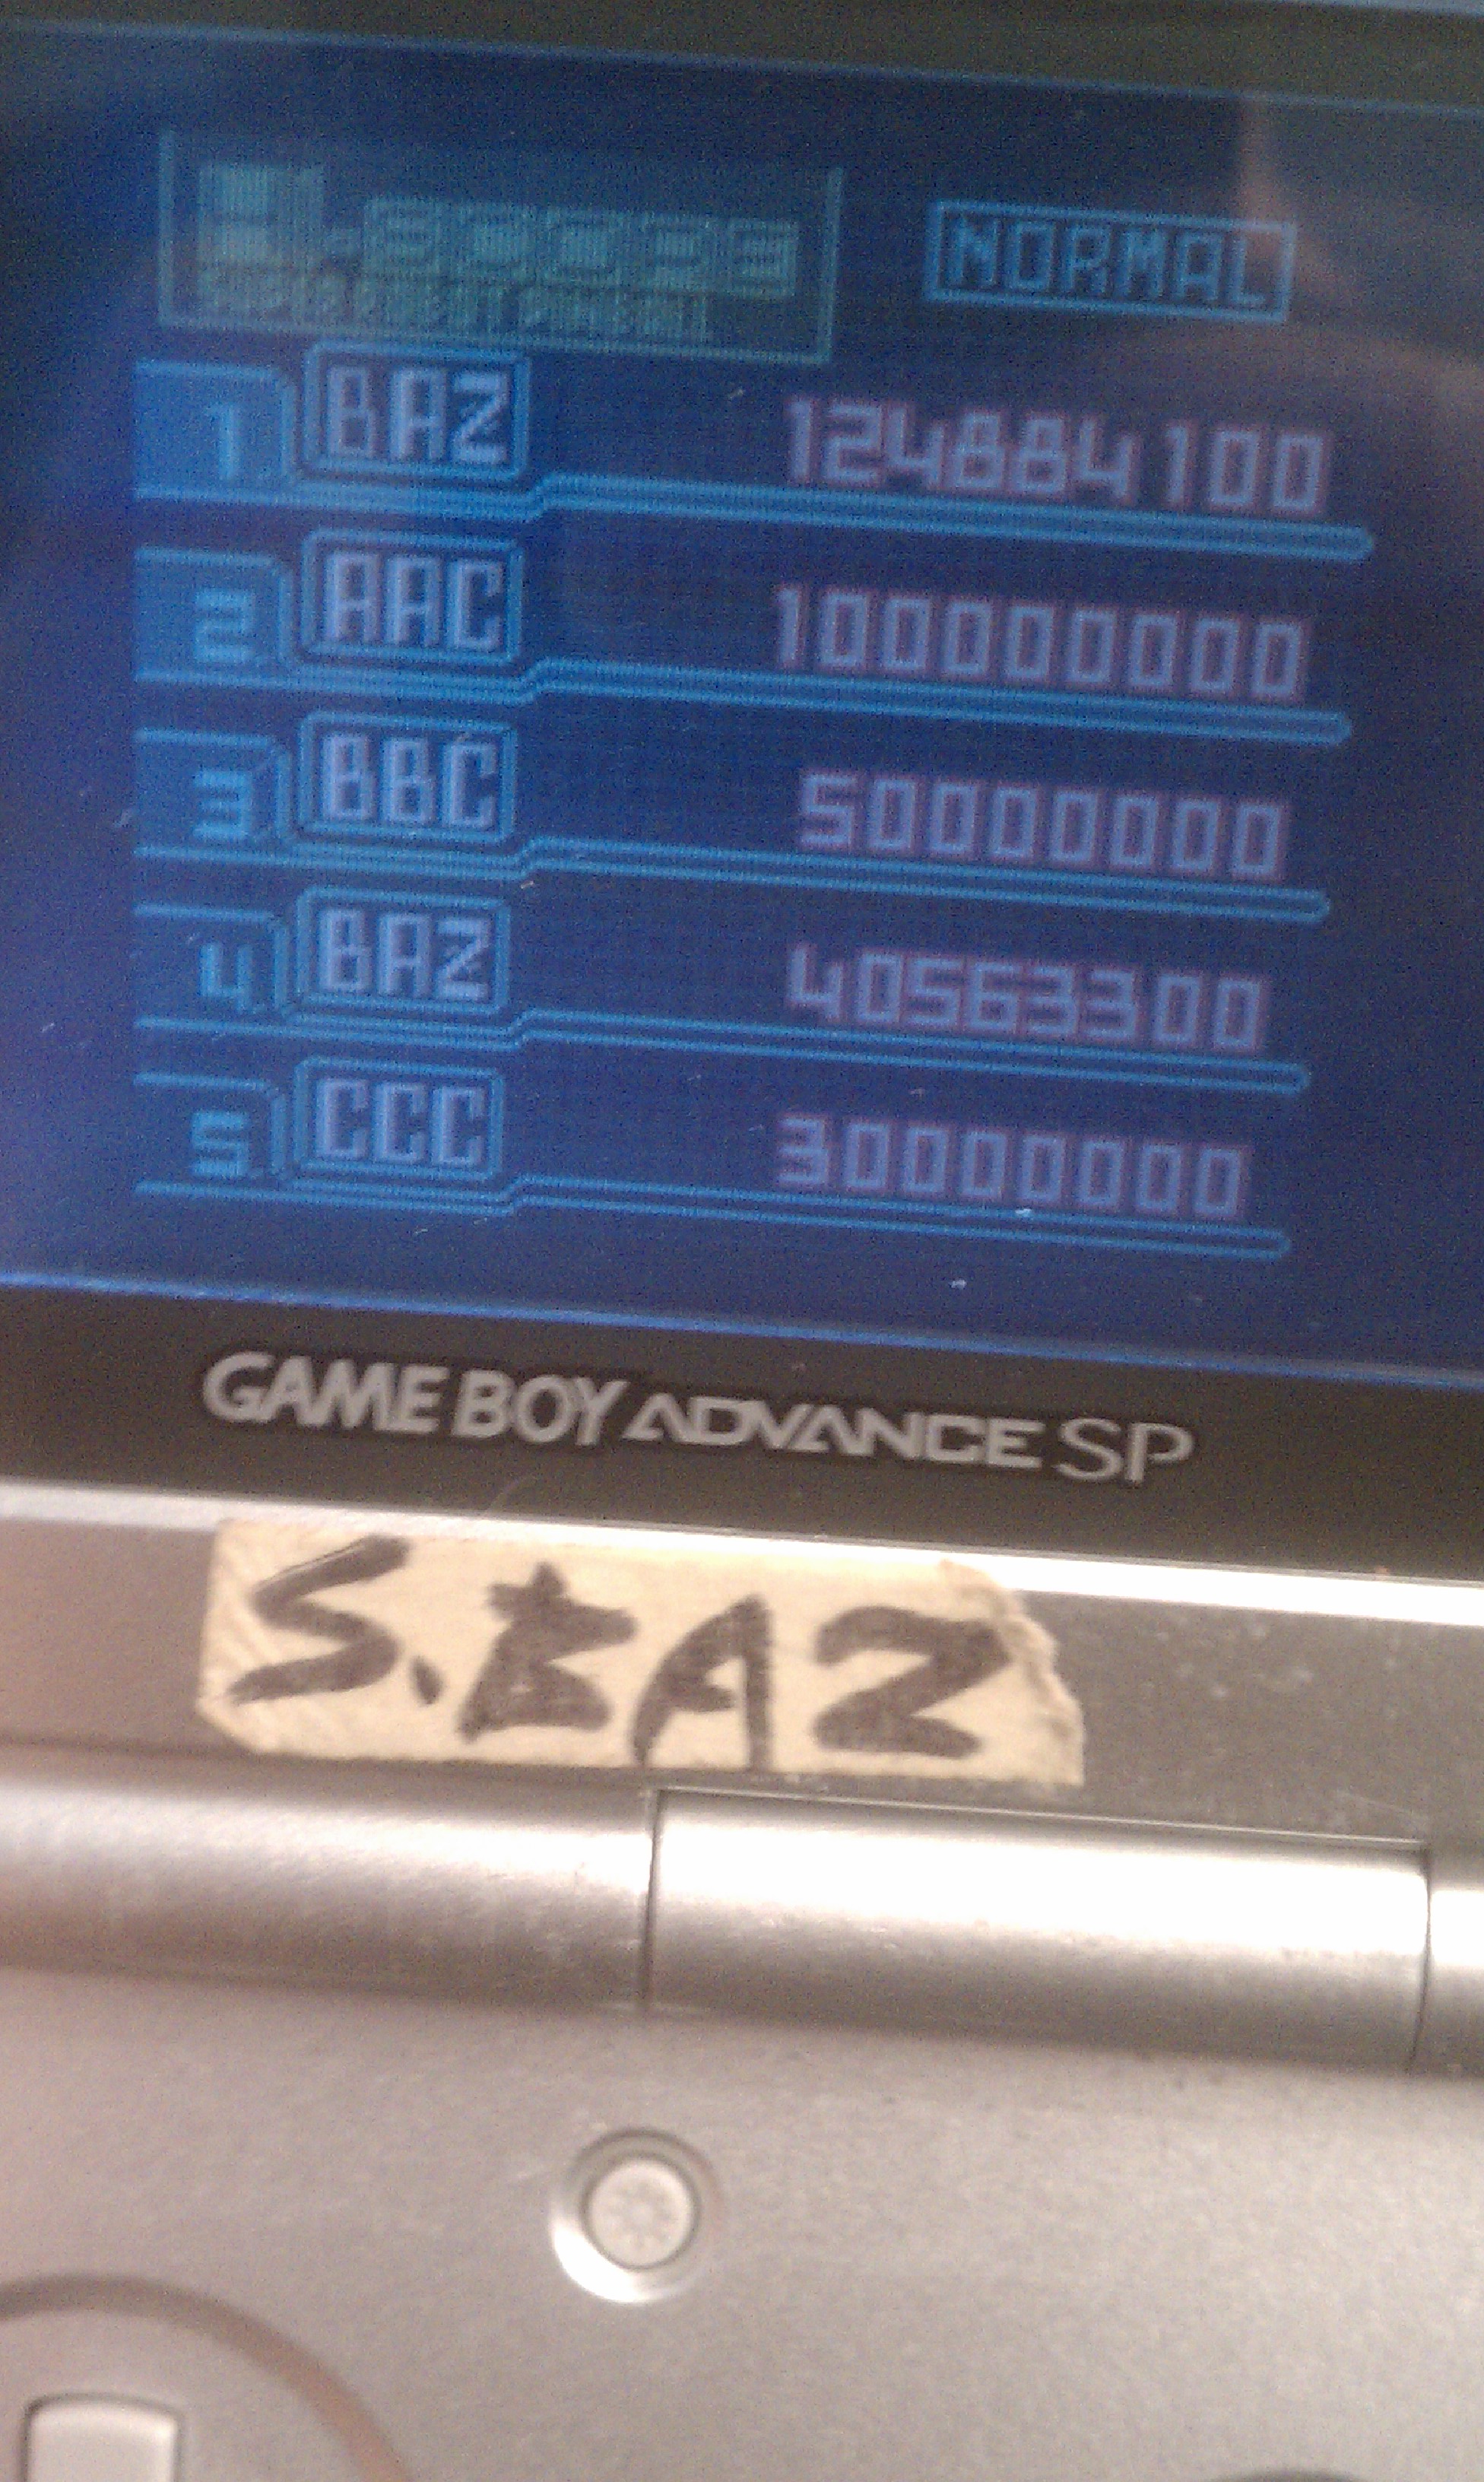 S.BAZ: Super Robot Pinball (Game Boy Color) 124,884,100 points on 2016-07-18 19:33:13